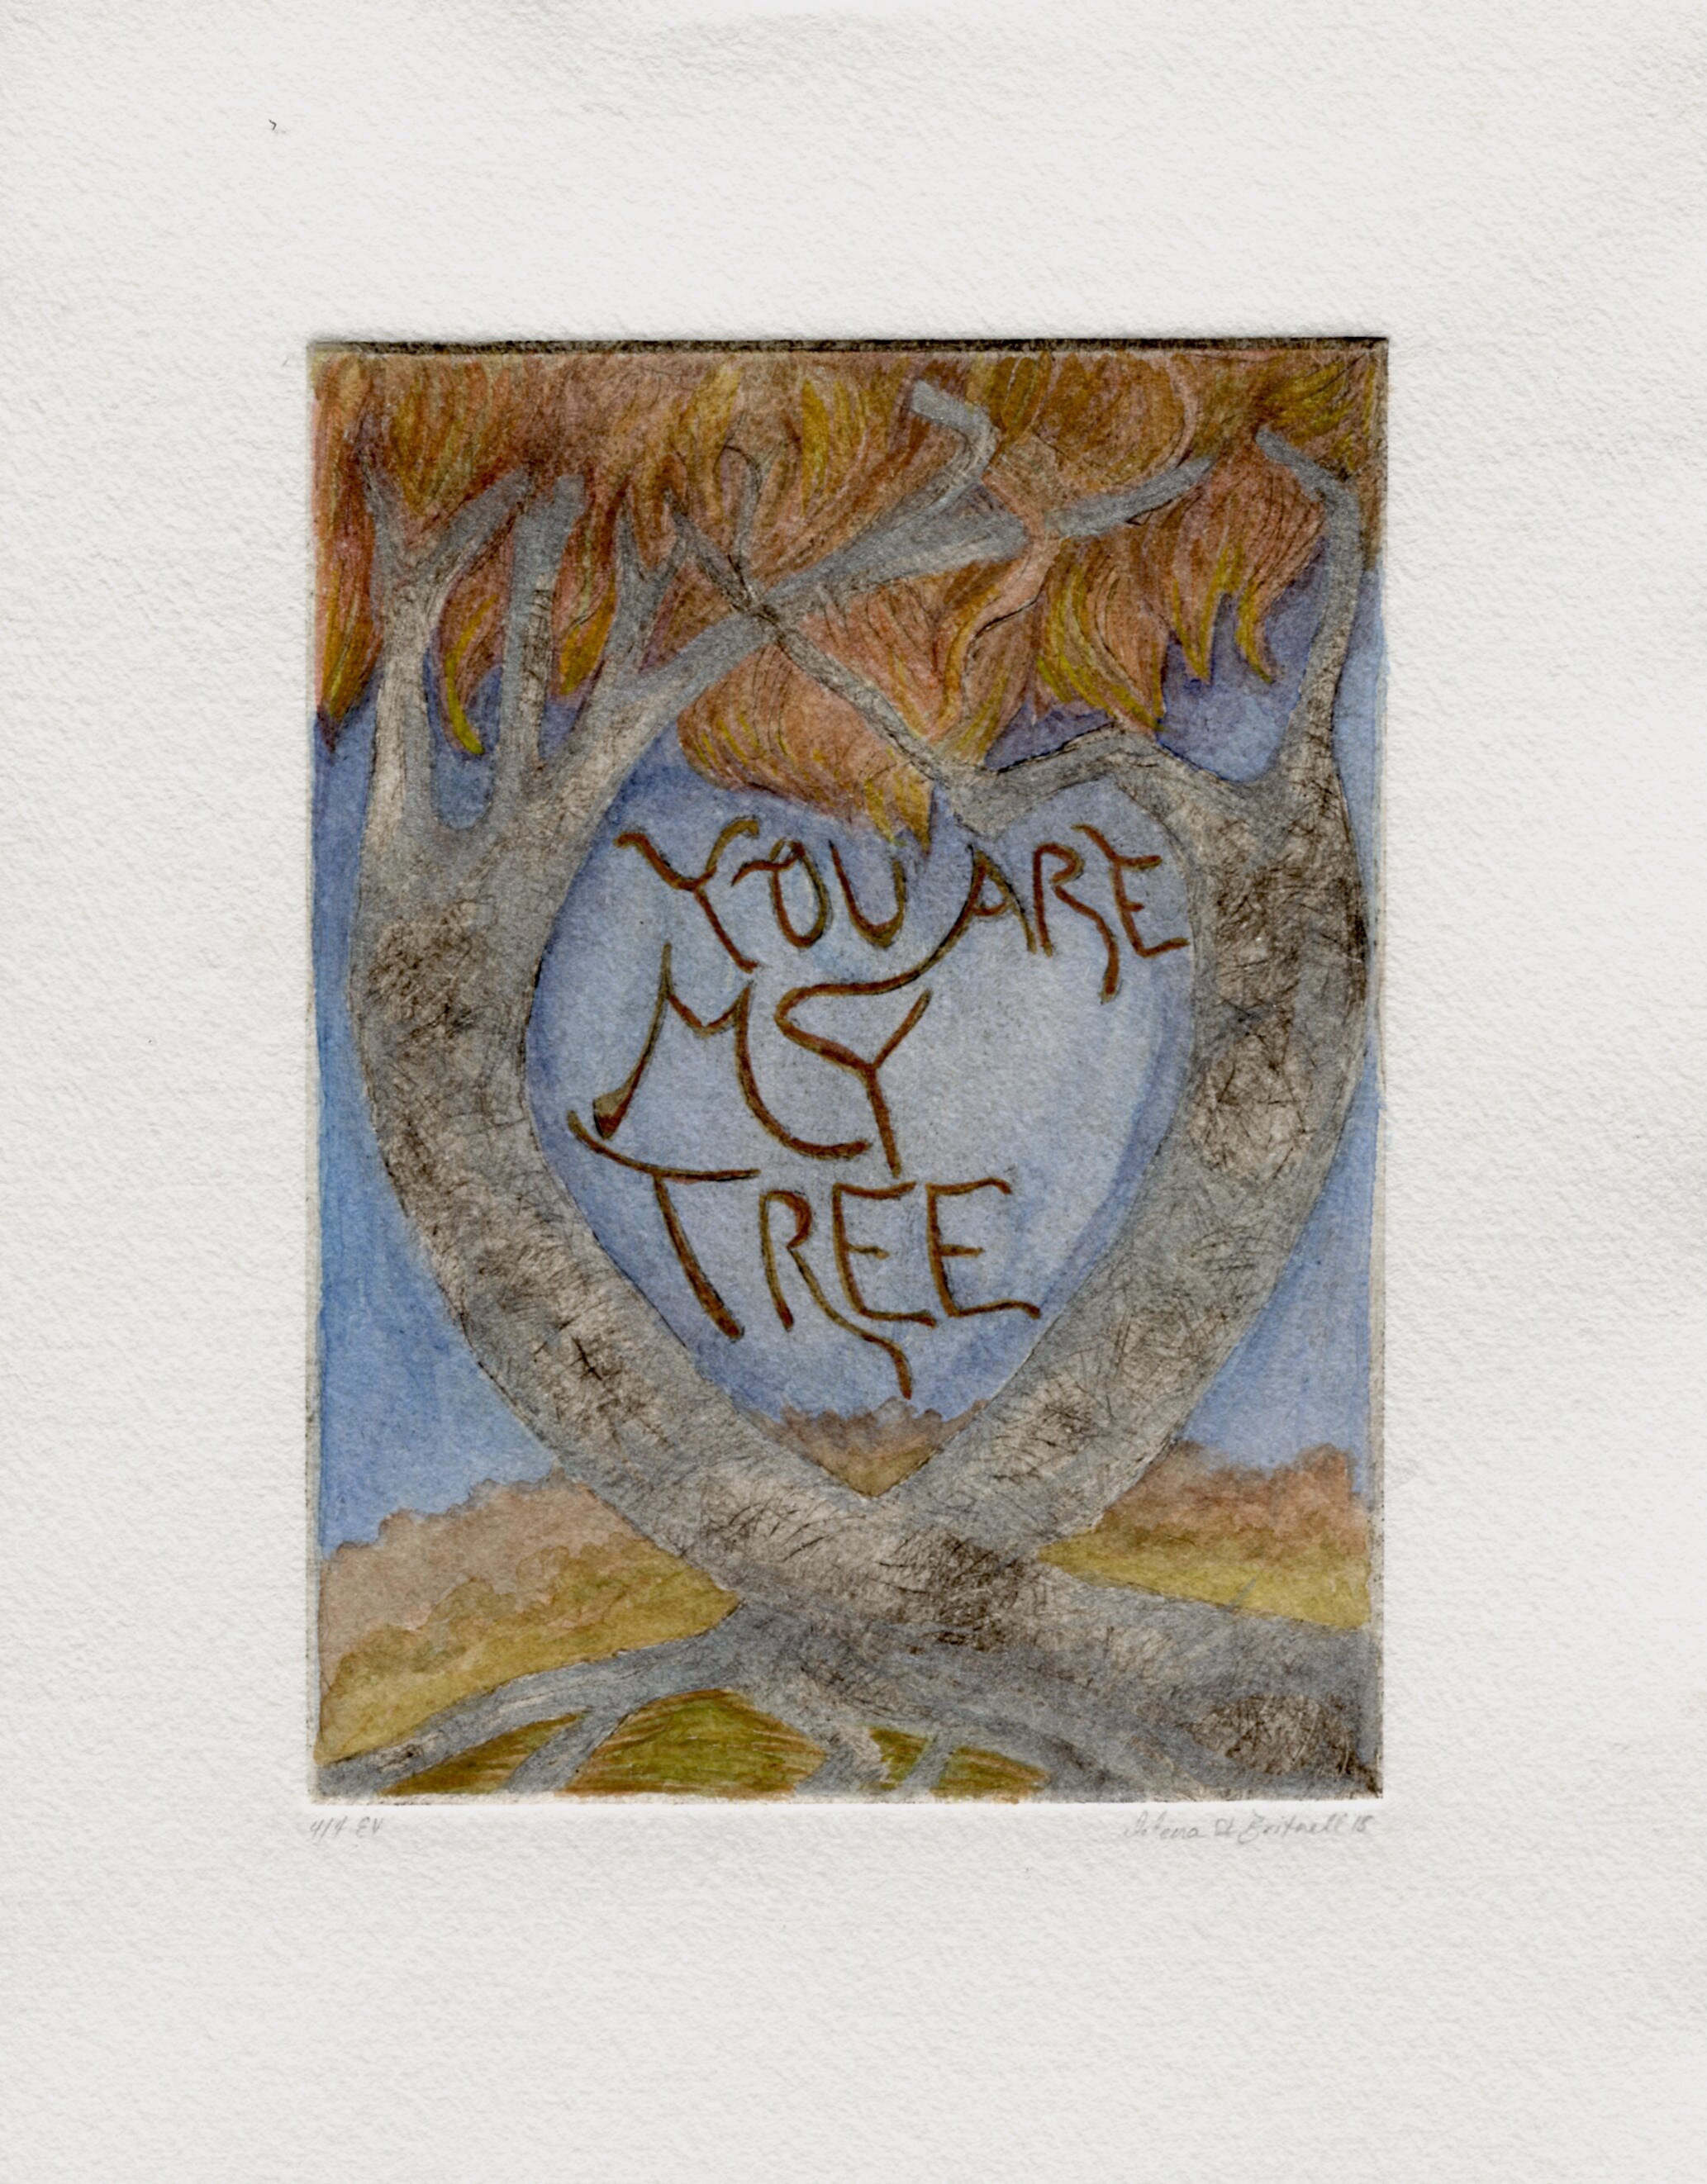 You are my tree 4/4